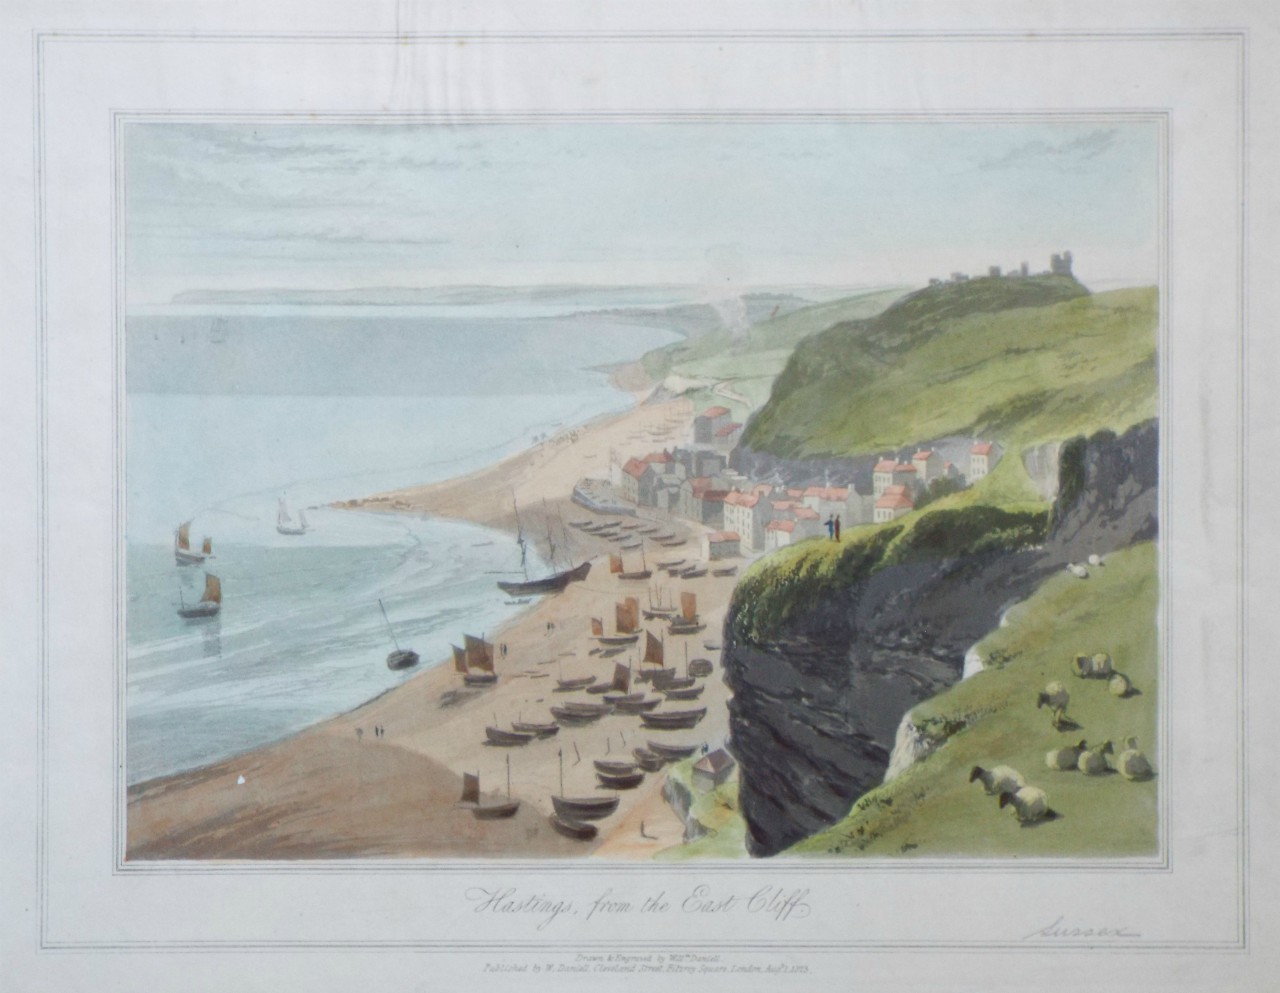 Aquatint - Hastings, from the East Cliff. - Daniell